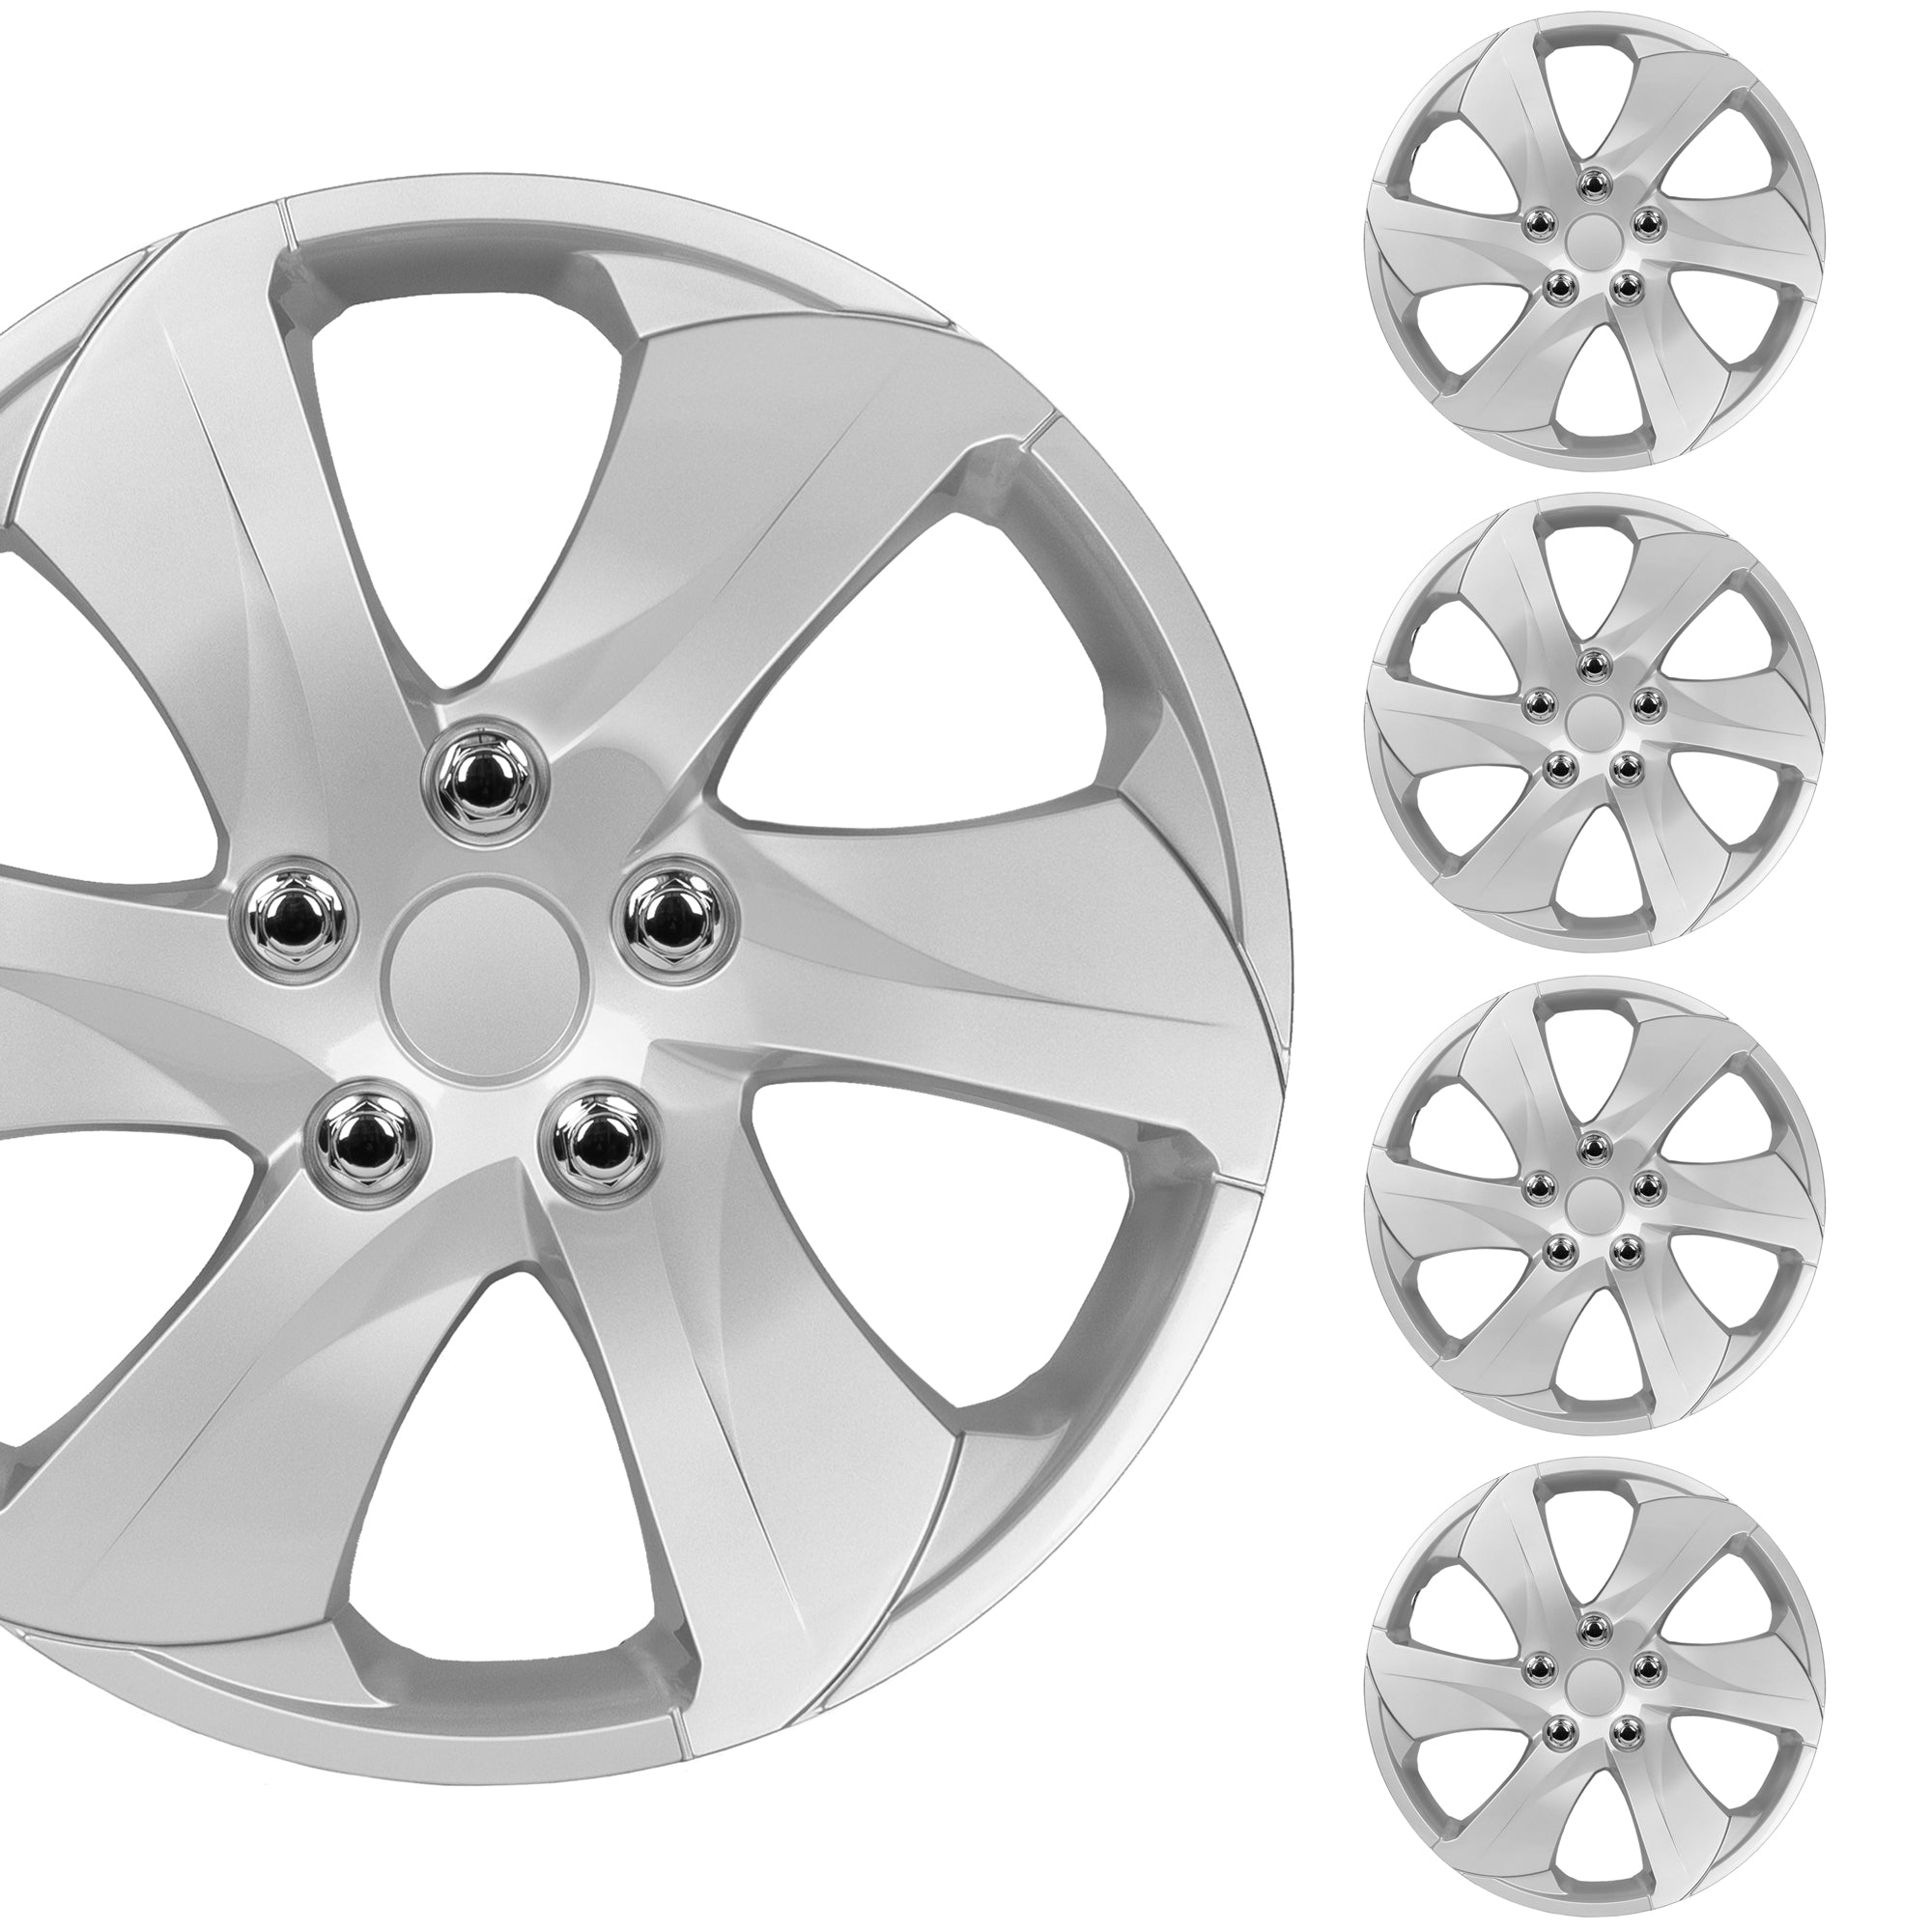 BDK (4-Pack) Premium Silver Hubcaps 16" Wheel Rim Cover Hub Caps Style Replacement Snap On Car Truck SUV - 16 Inch Set